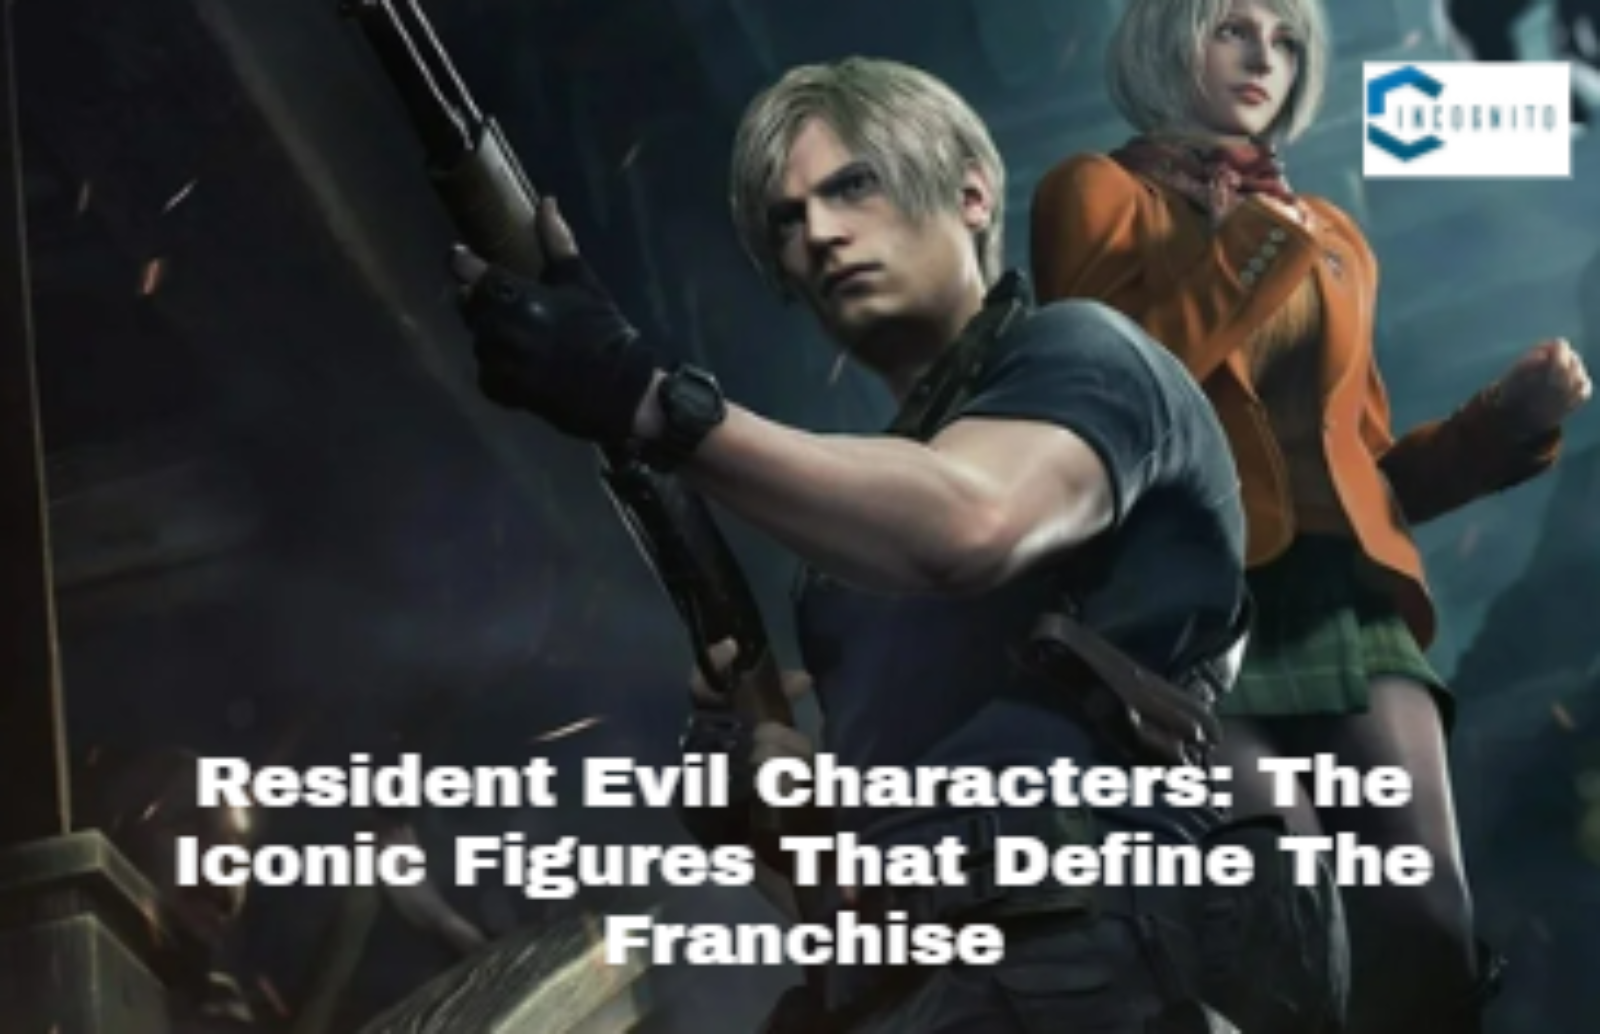 Resident Evil Characters: The Iconic Figures That Define The Franchise